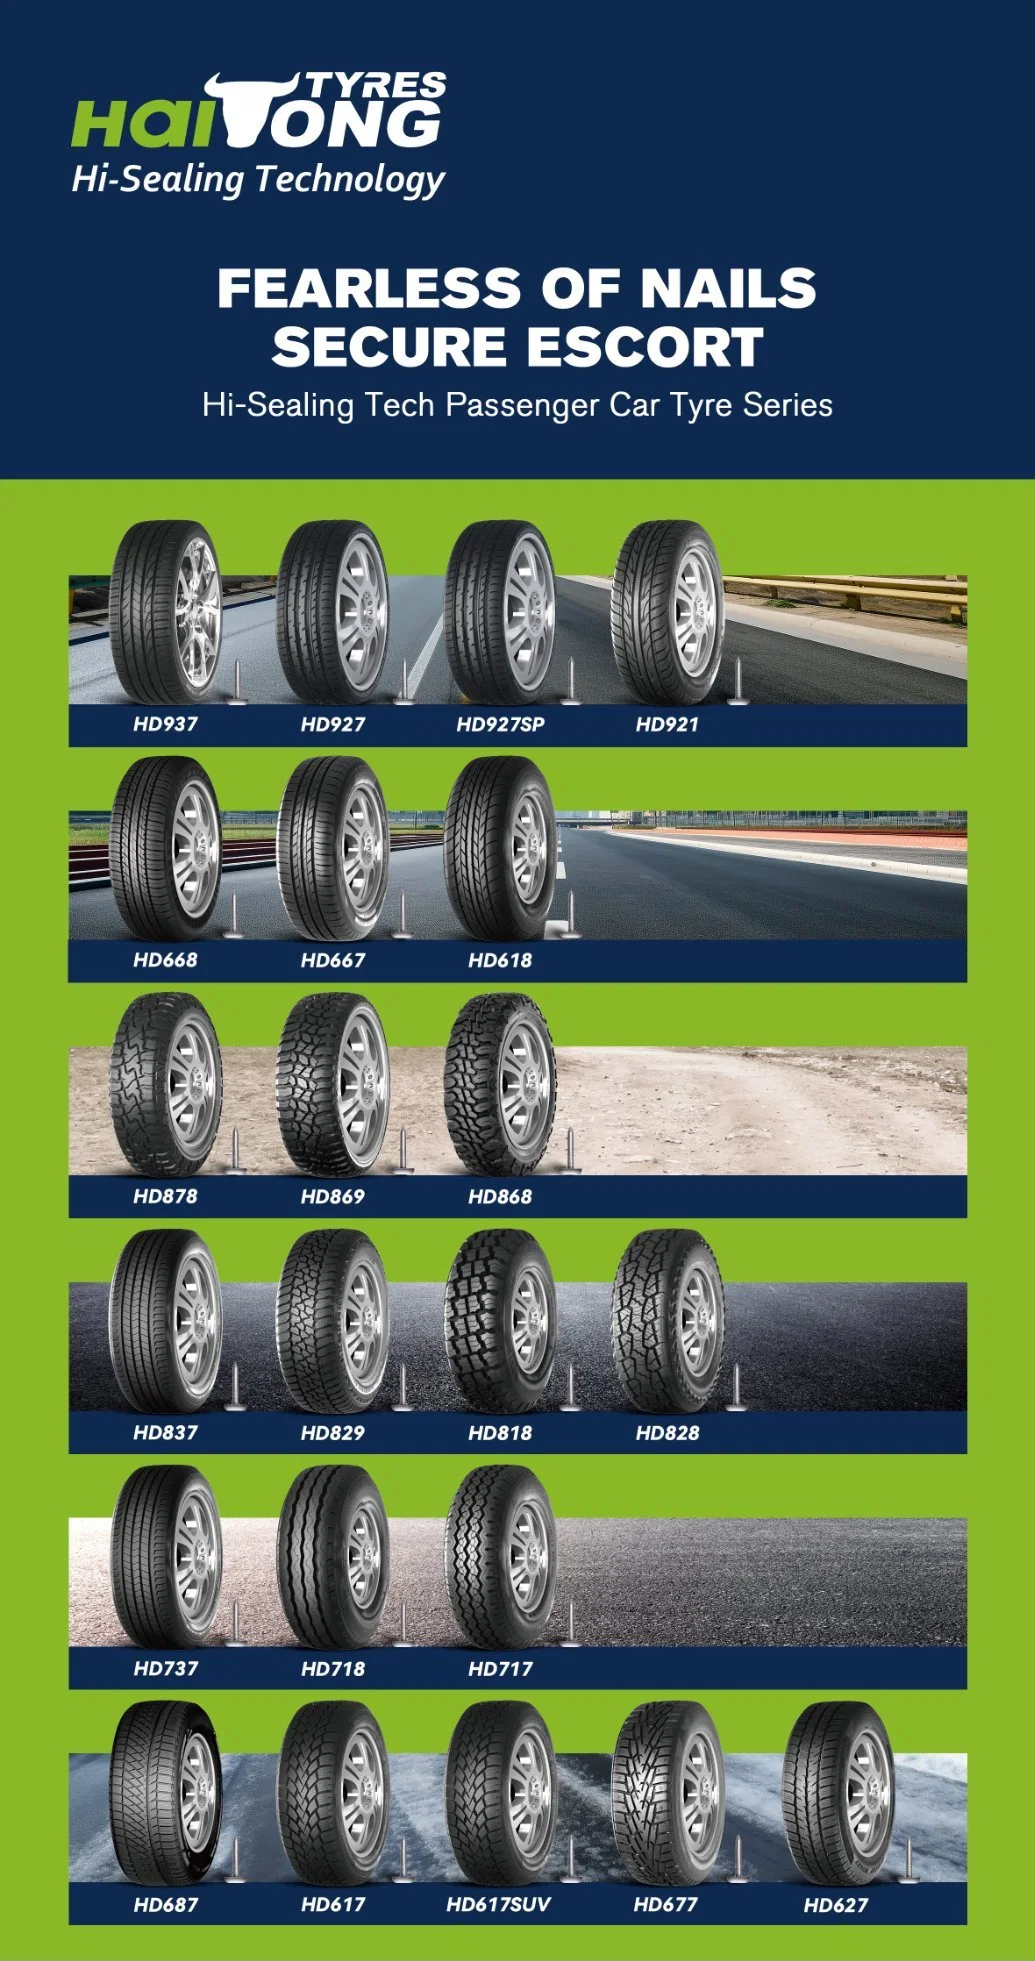 Tires Good Quality Radial Tires for High performance 395/85r20 Run-Flat Tires